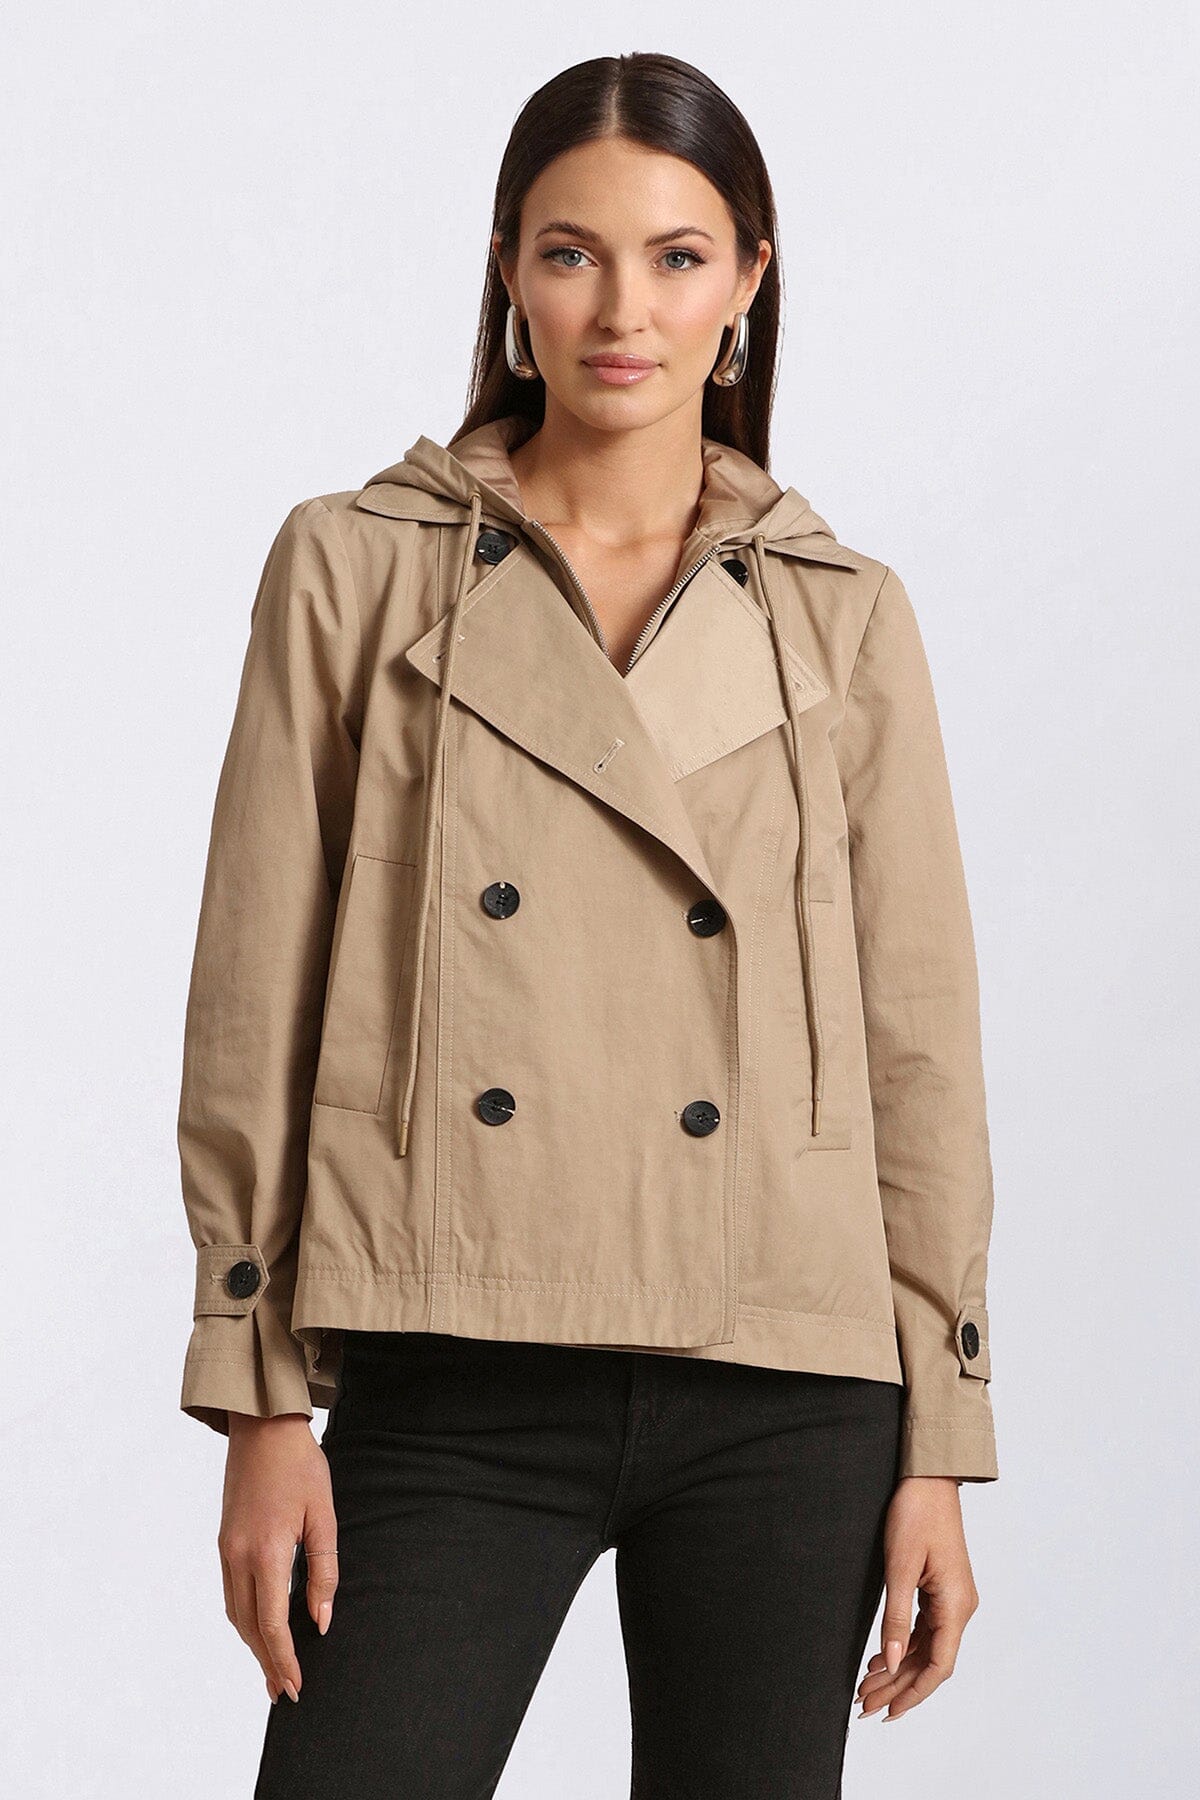 Khaki cotton blend hooded short trench coat - figure flattering day to night coats jackets for ladies by Avec Les Filles